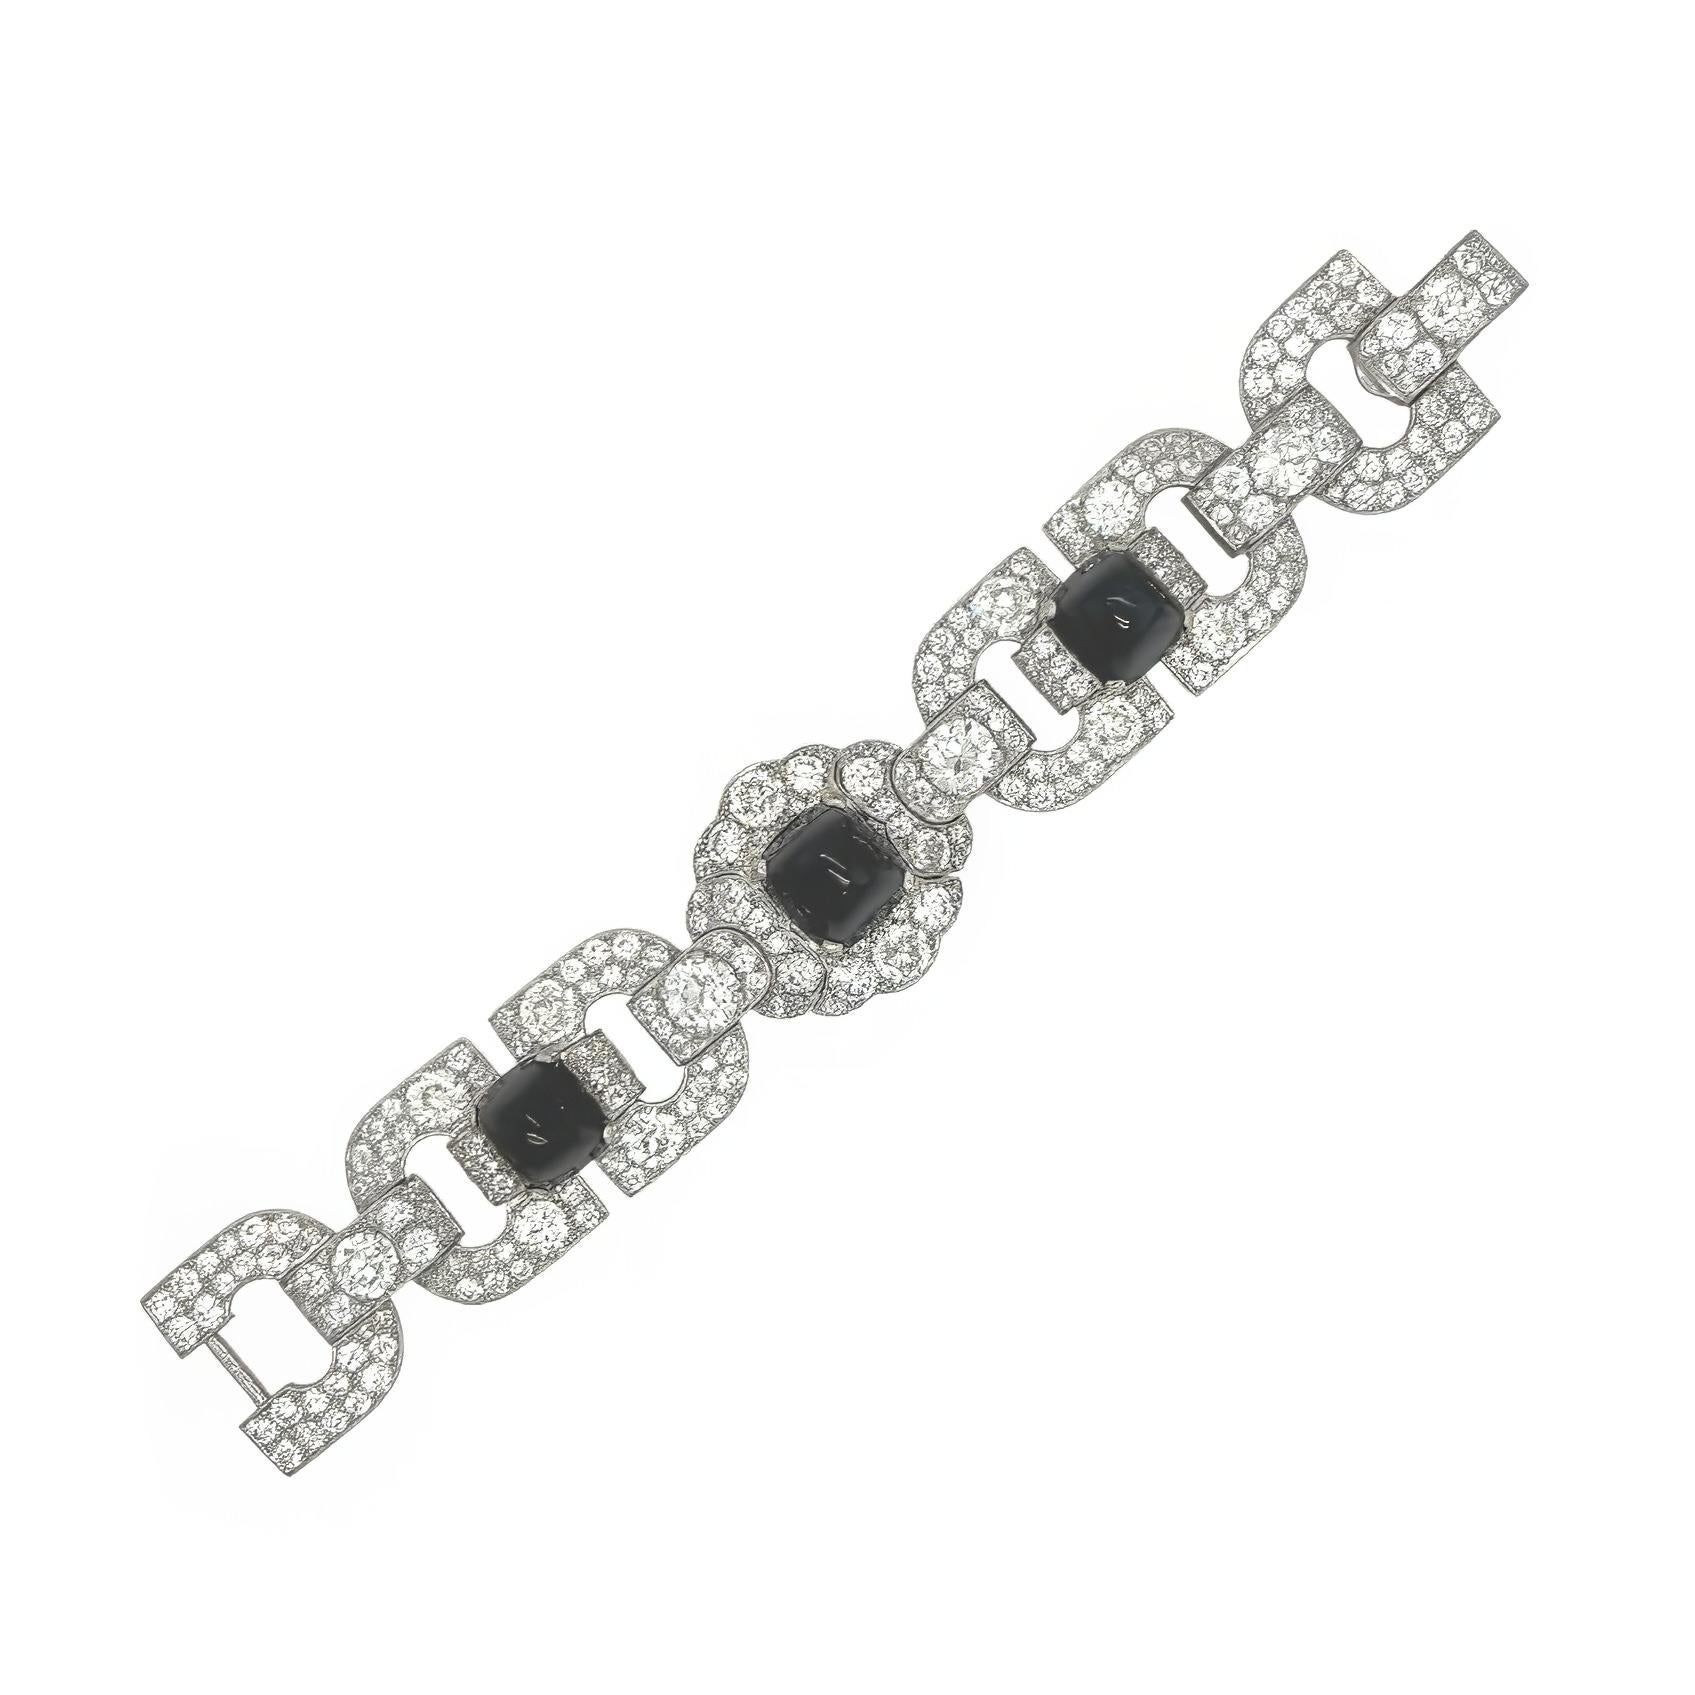 An Art Deco, platinum, sapphire and diamond bracelet.  Cartier.  Set with three sugarloaf cabochon sapphires totaling approximately 45 carats, five old European cut diamonds totaling approximately 6.5 carats and two hundred and fifty-eight old